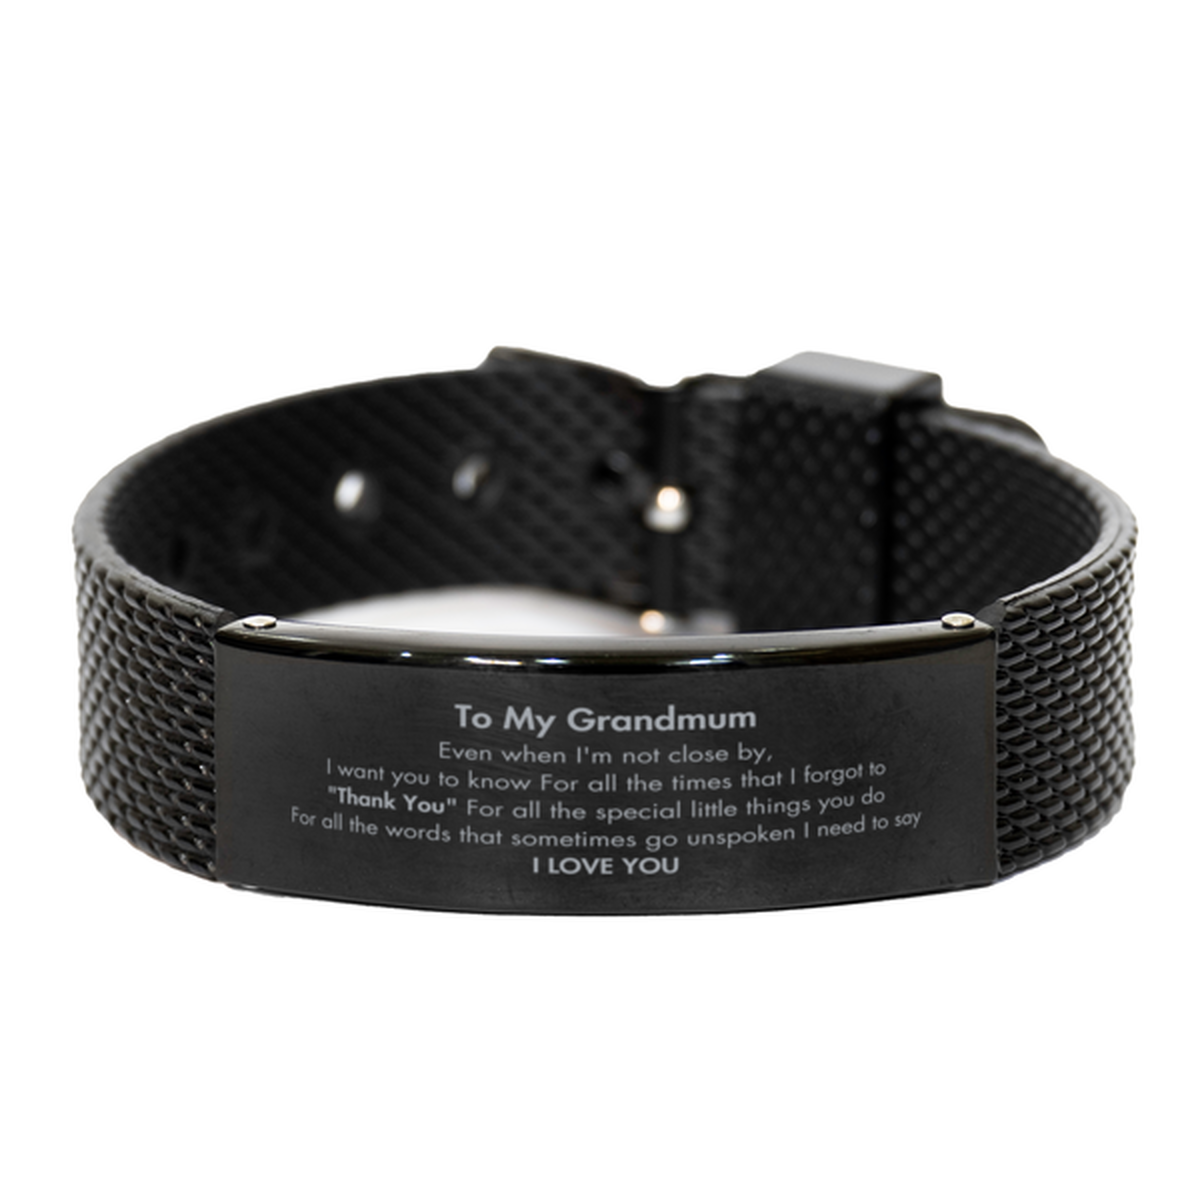 Thank You Gifts for Grandmum, Keepsake Black Shark Mesh Bracelet Gifts for Grandmum Birthday Mother's day Father's Day Grandmum For all the words That sometimes go unspoken I need to say I LOVE YOU